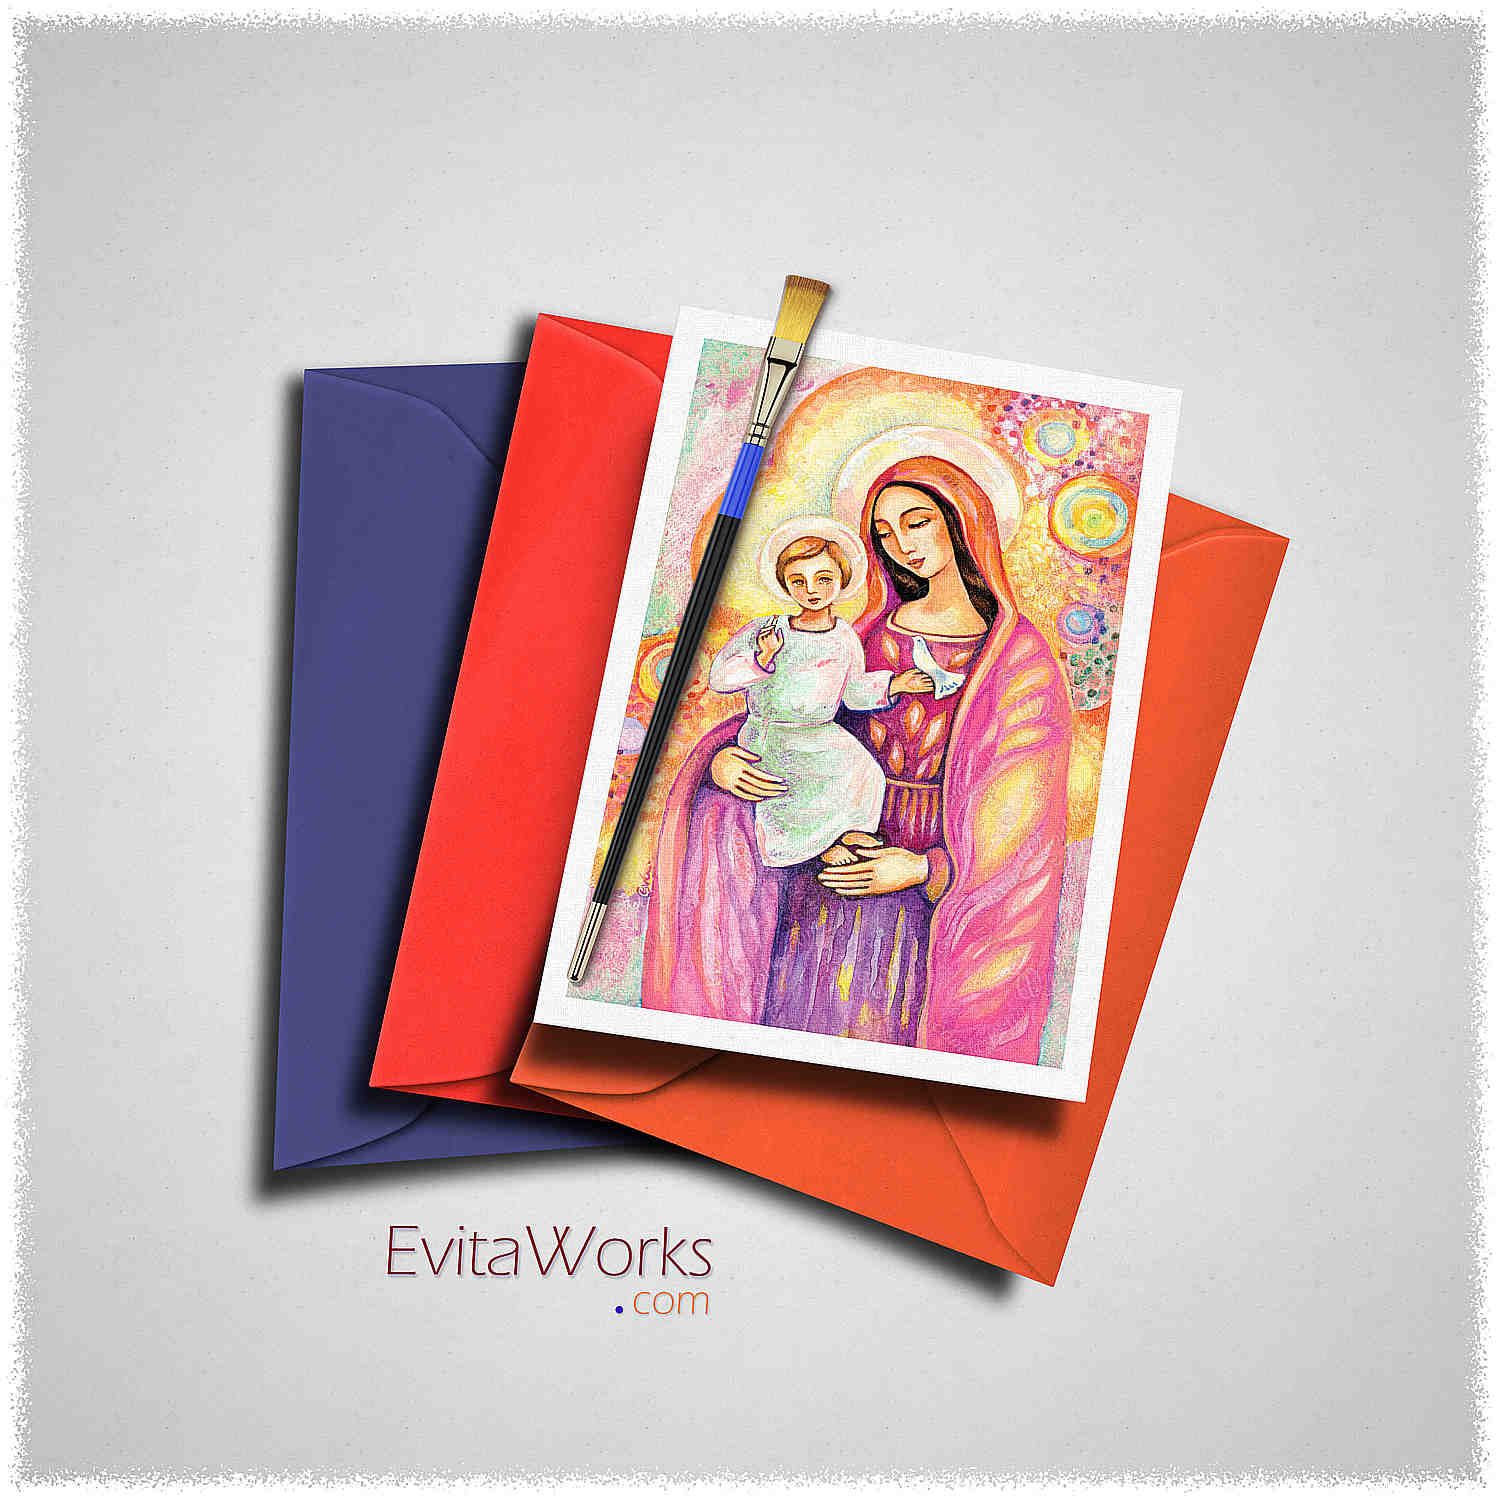 Hit to learn about "Blessing from Light, Madonna and Child" on cards